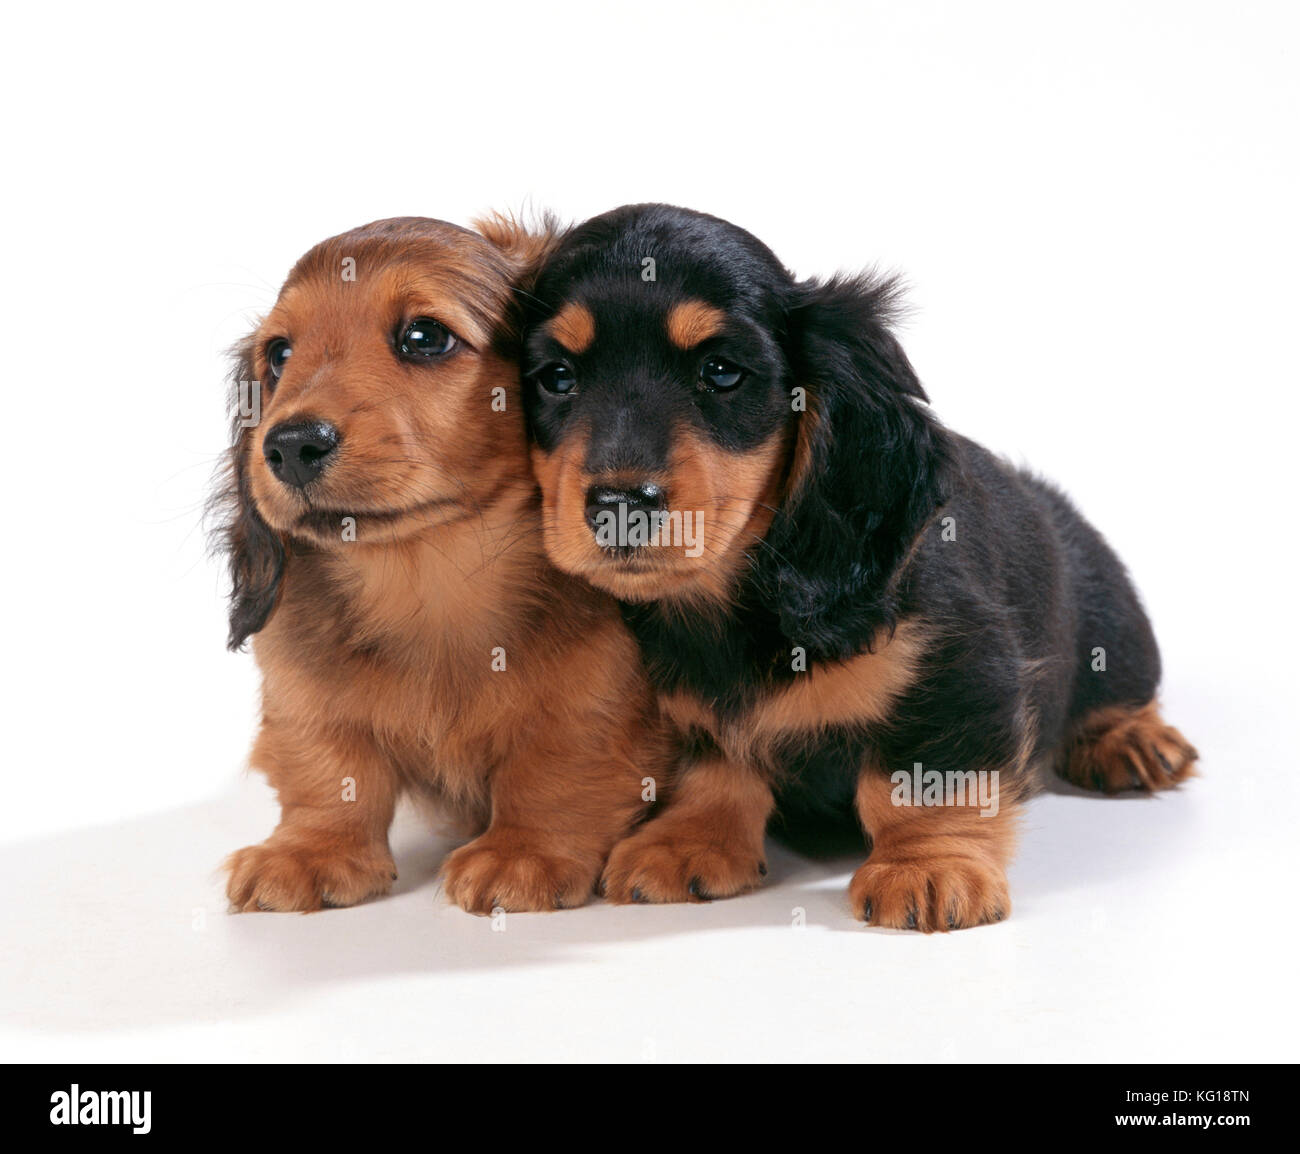 DOG Miniature Long Haired Dachshund Teckel Puppies X2 Also